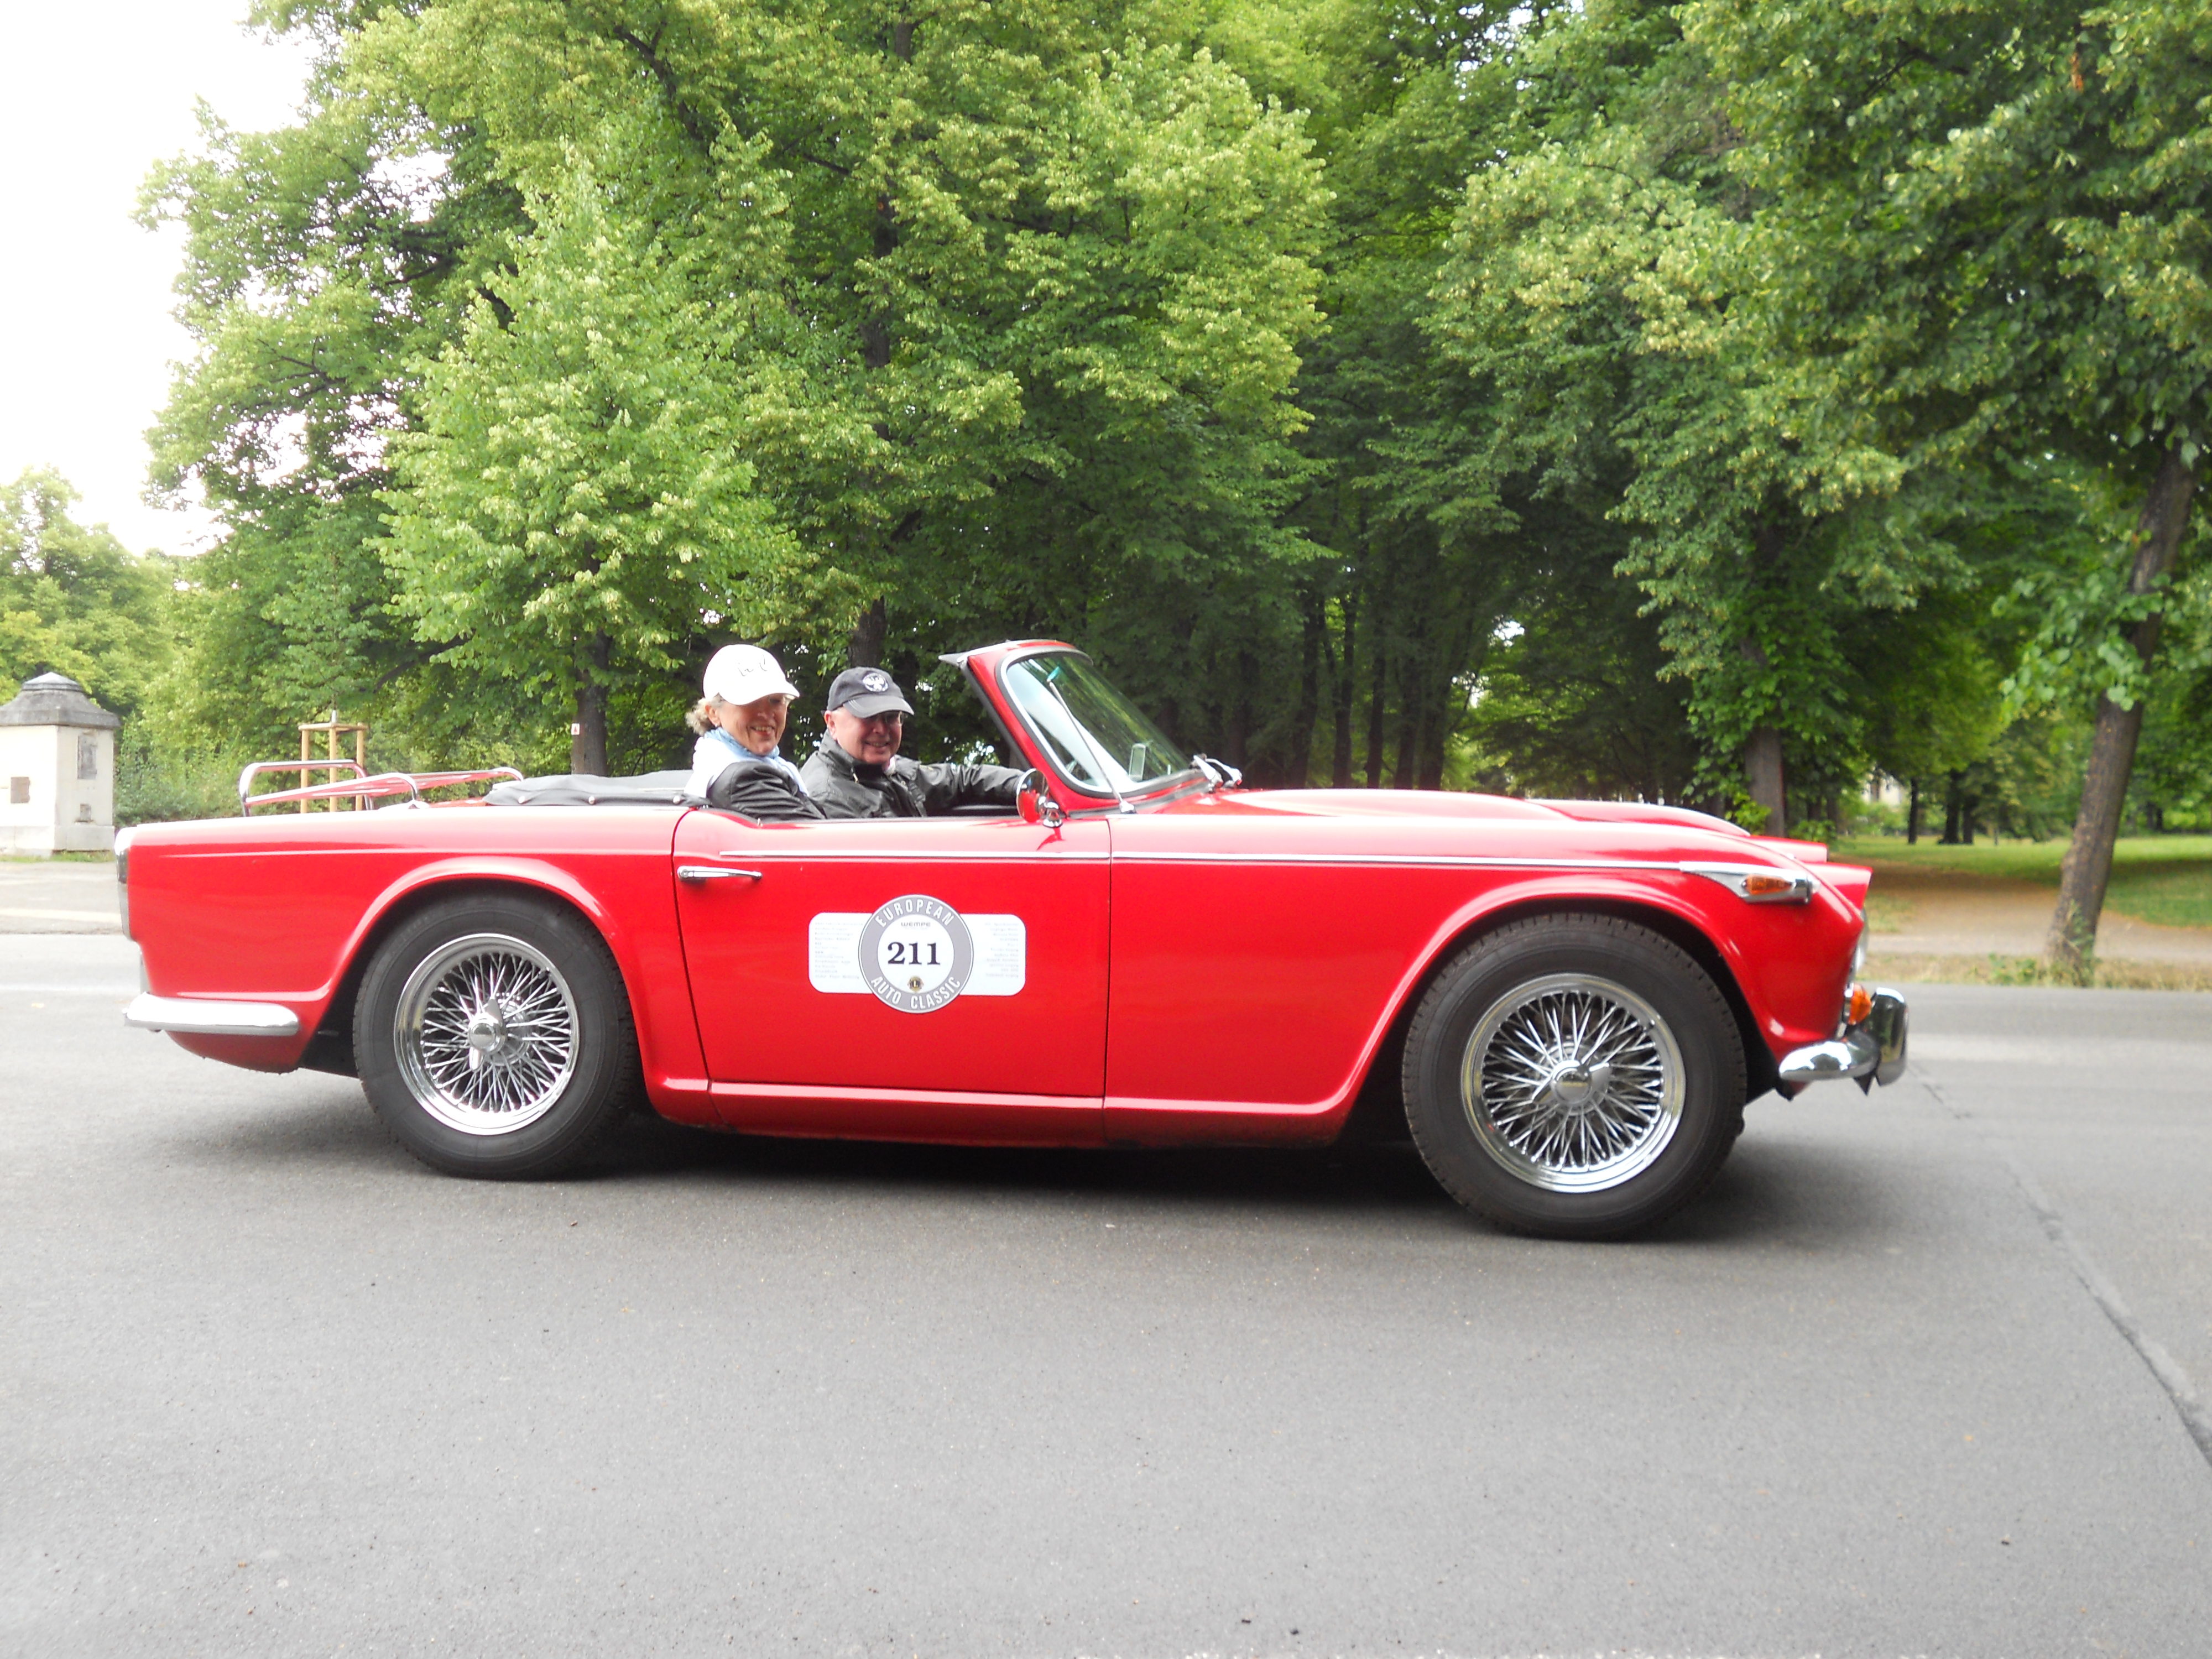 Triumph TR 4A IRS (1965) | Flickr - Photo Sharing!